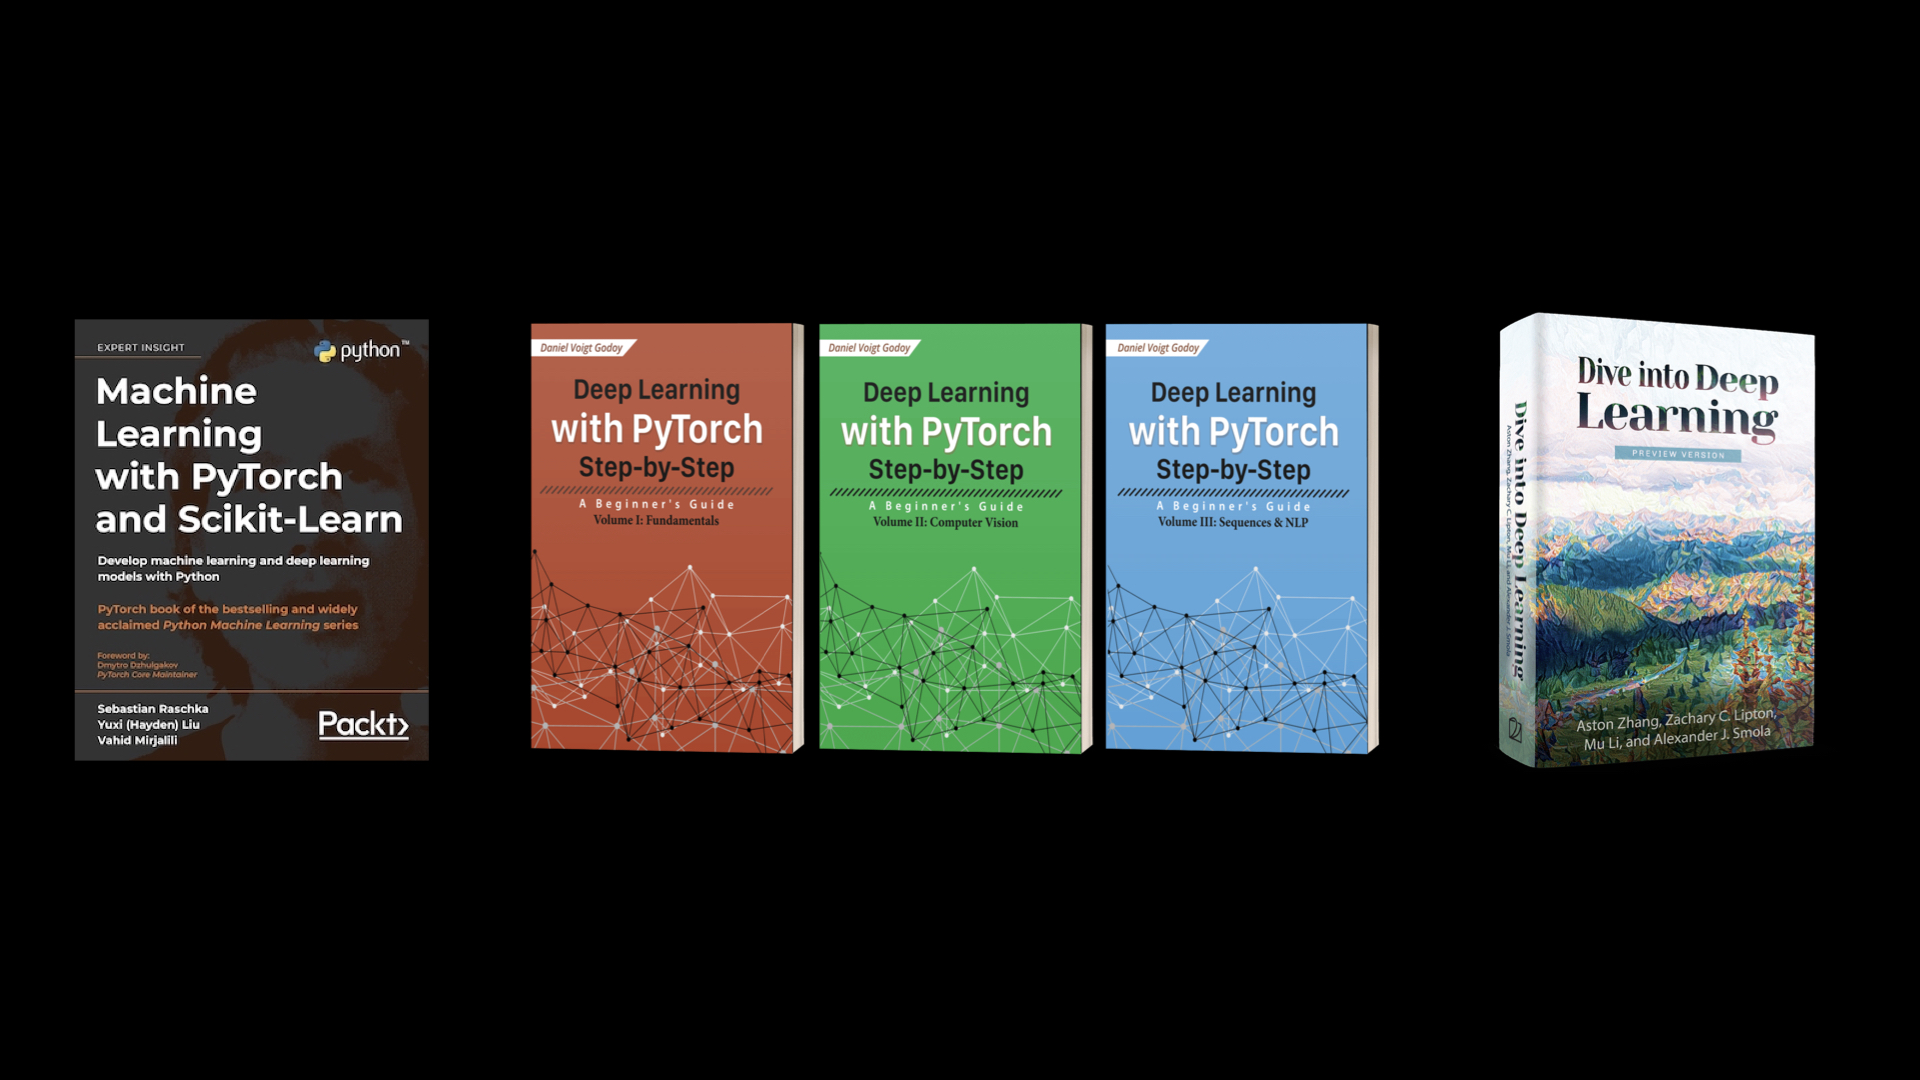 Textbooks to learn more about PyTorch as well as deep learning in general.